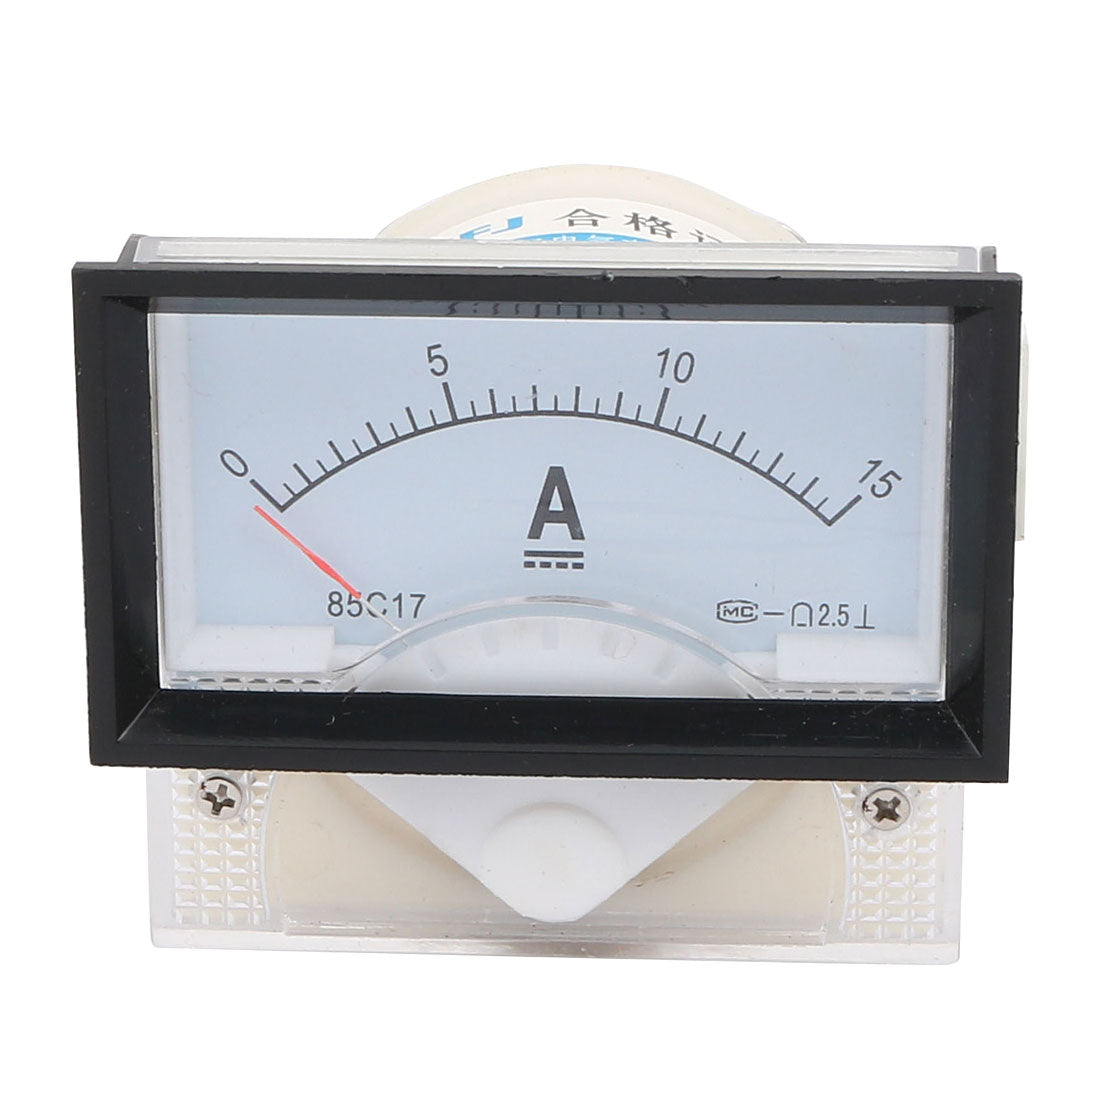 uxcell Uxcell 0-15A Analog DC Current Panel Meter Amperemeter 85C17-15A